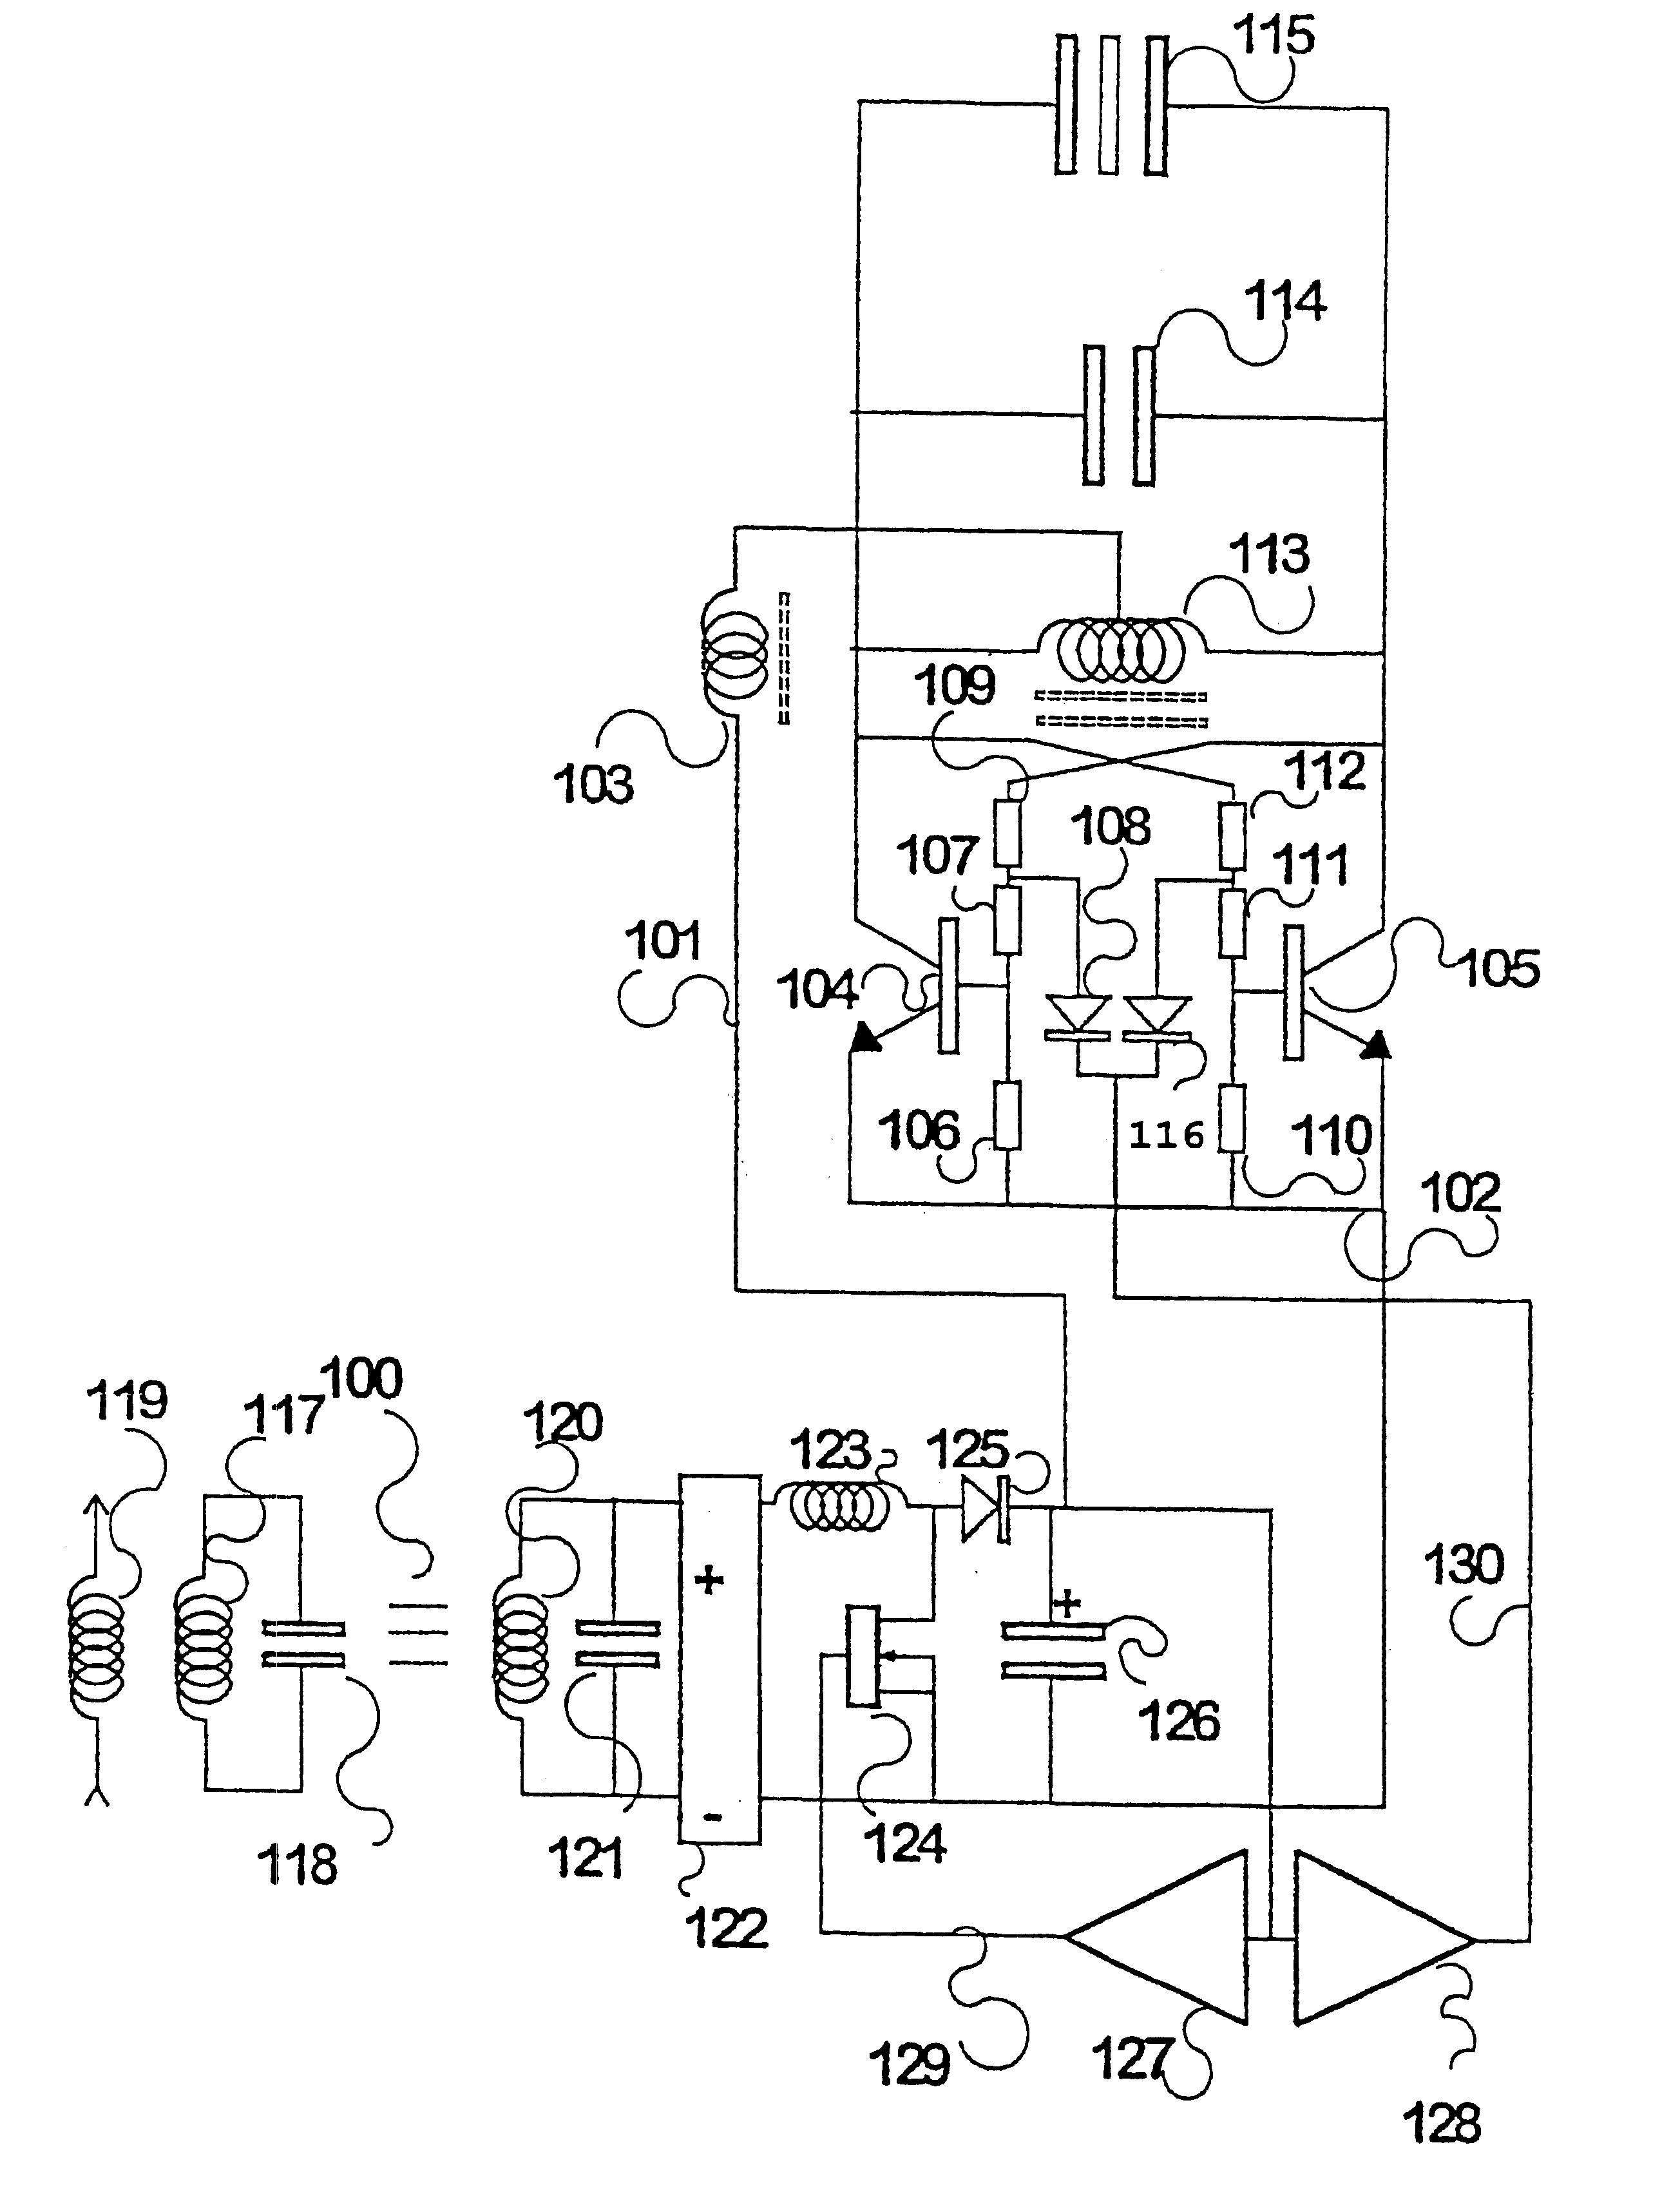 Power supply for an electroluminescent display